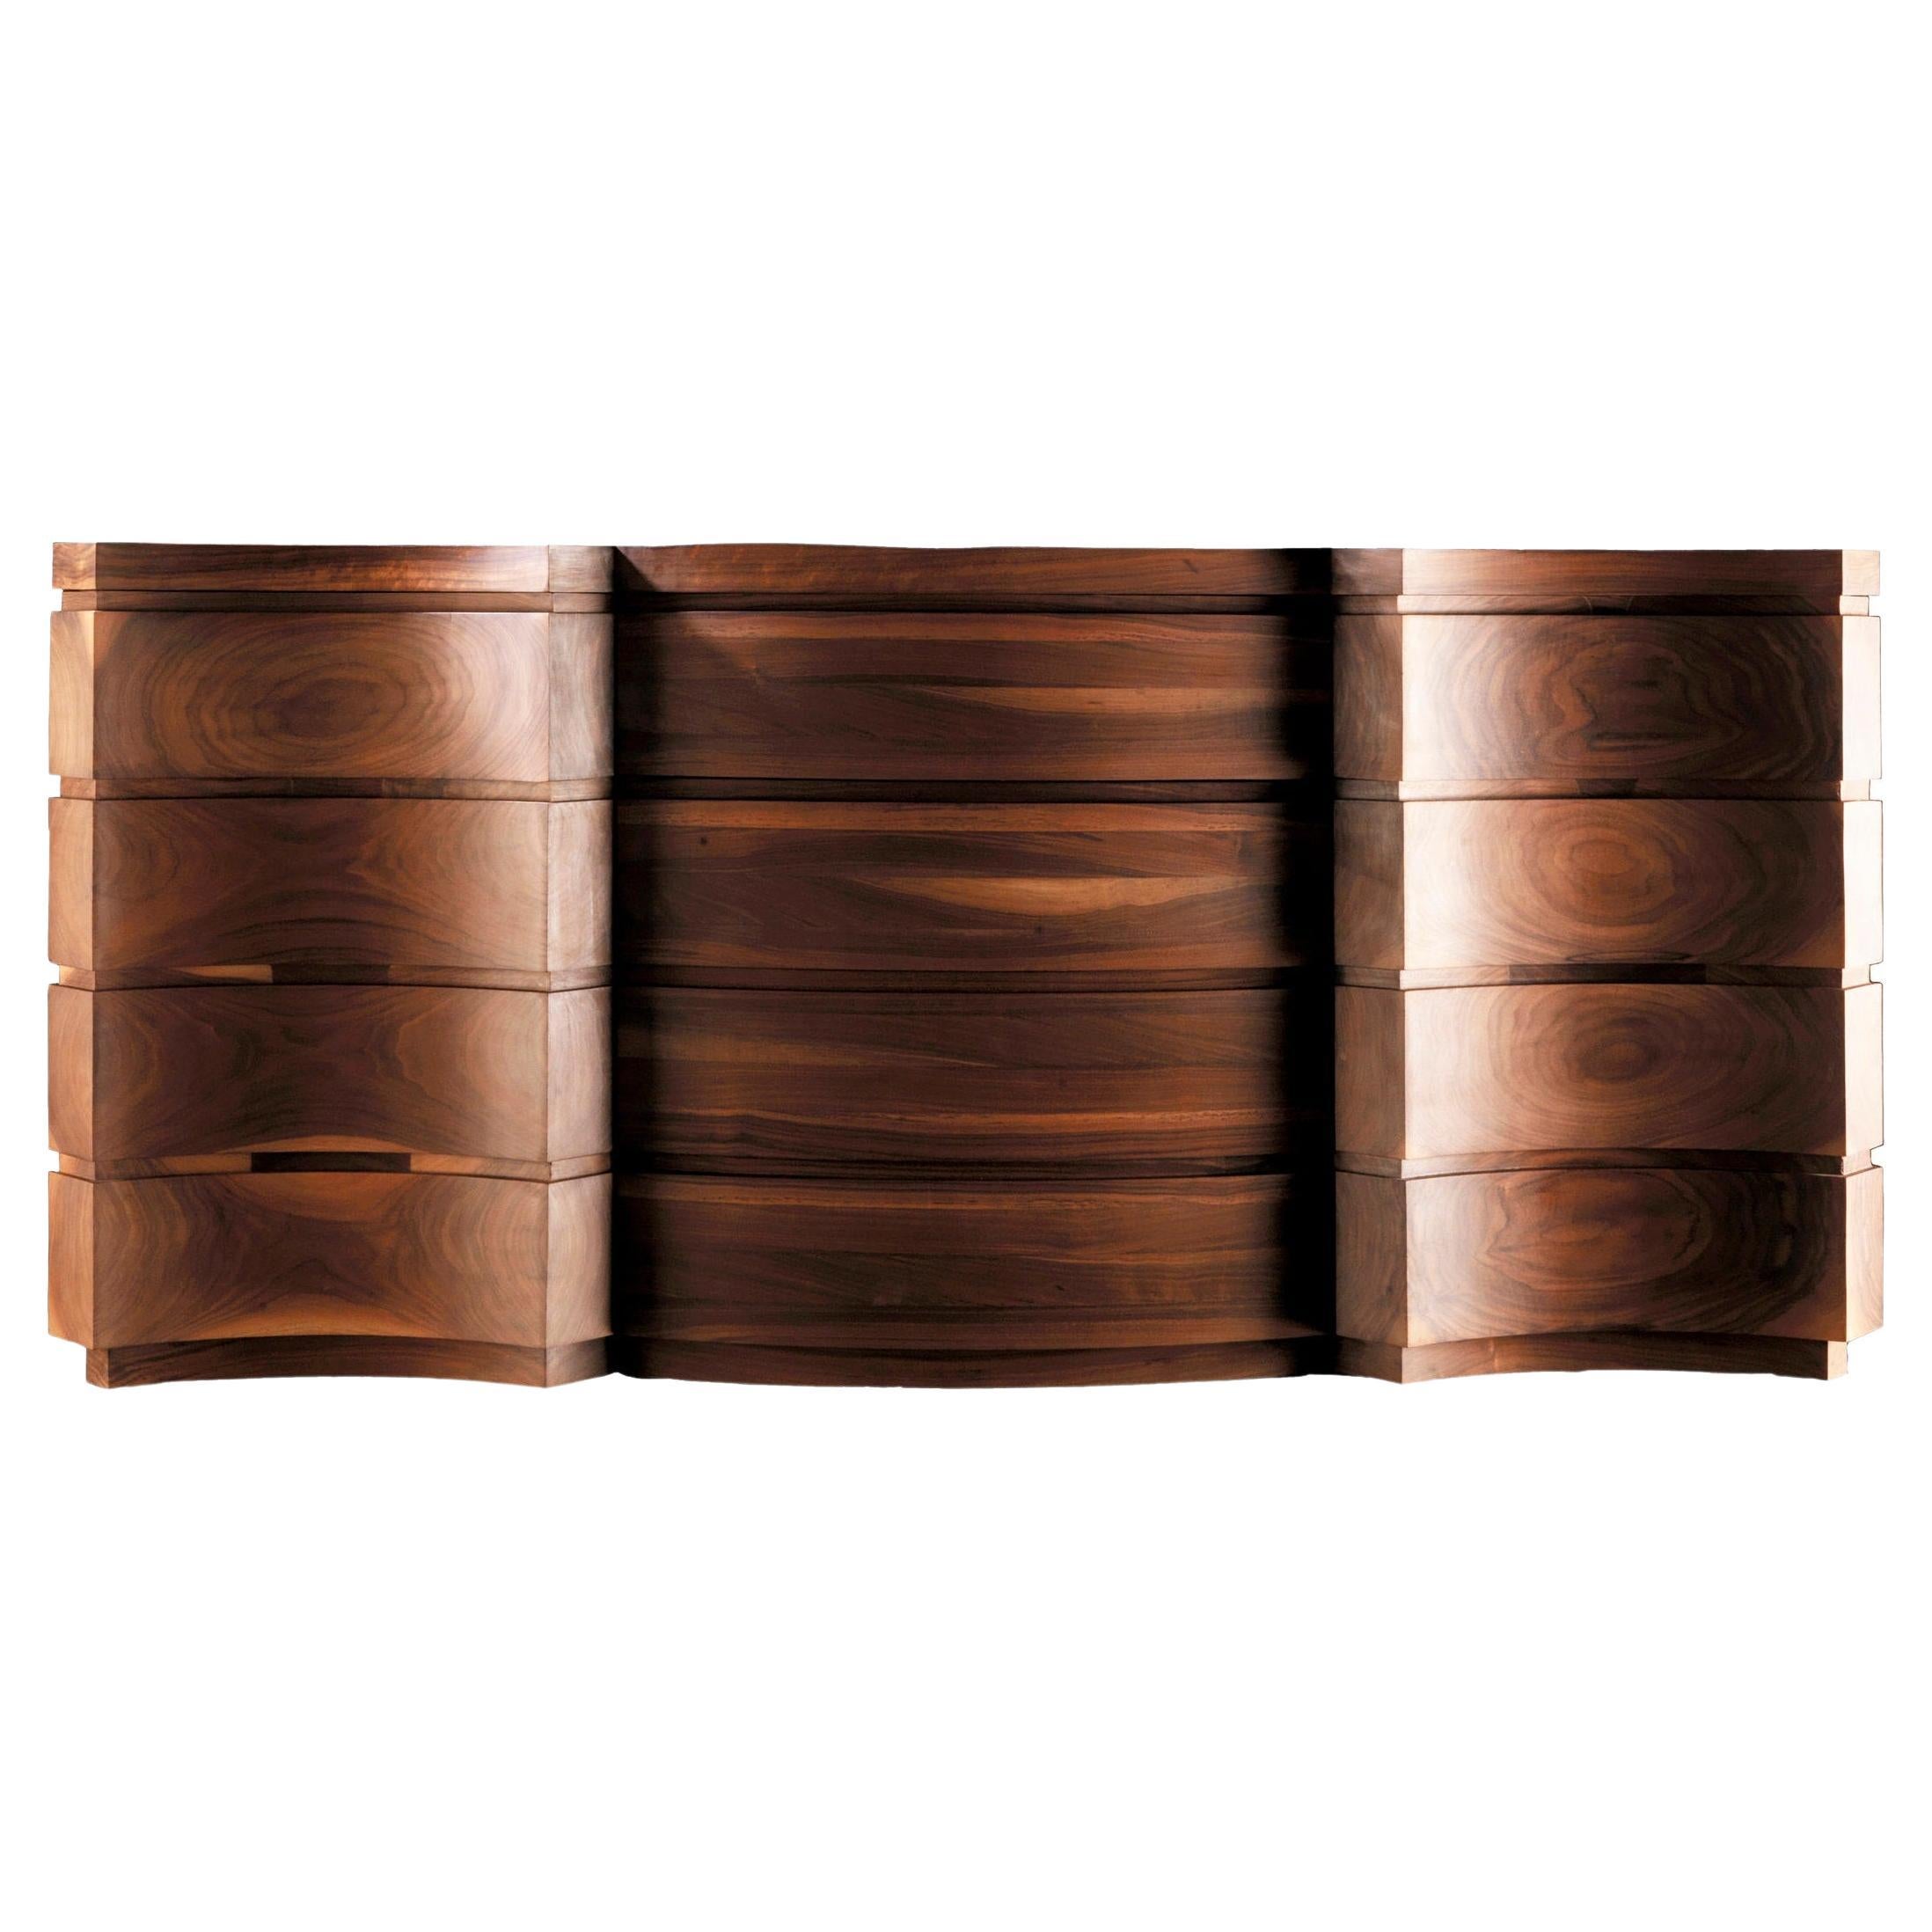 American Walnut Sideboard Inspired by Neoclassical Architecture